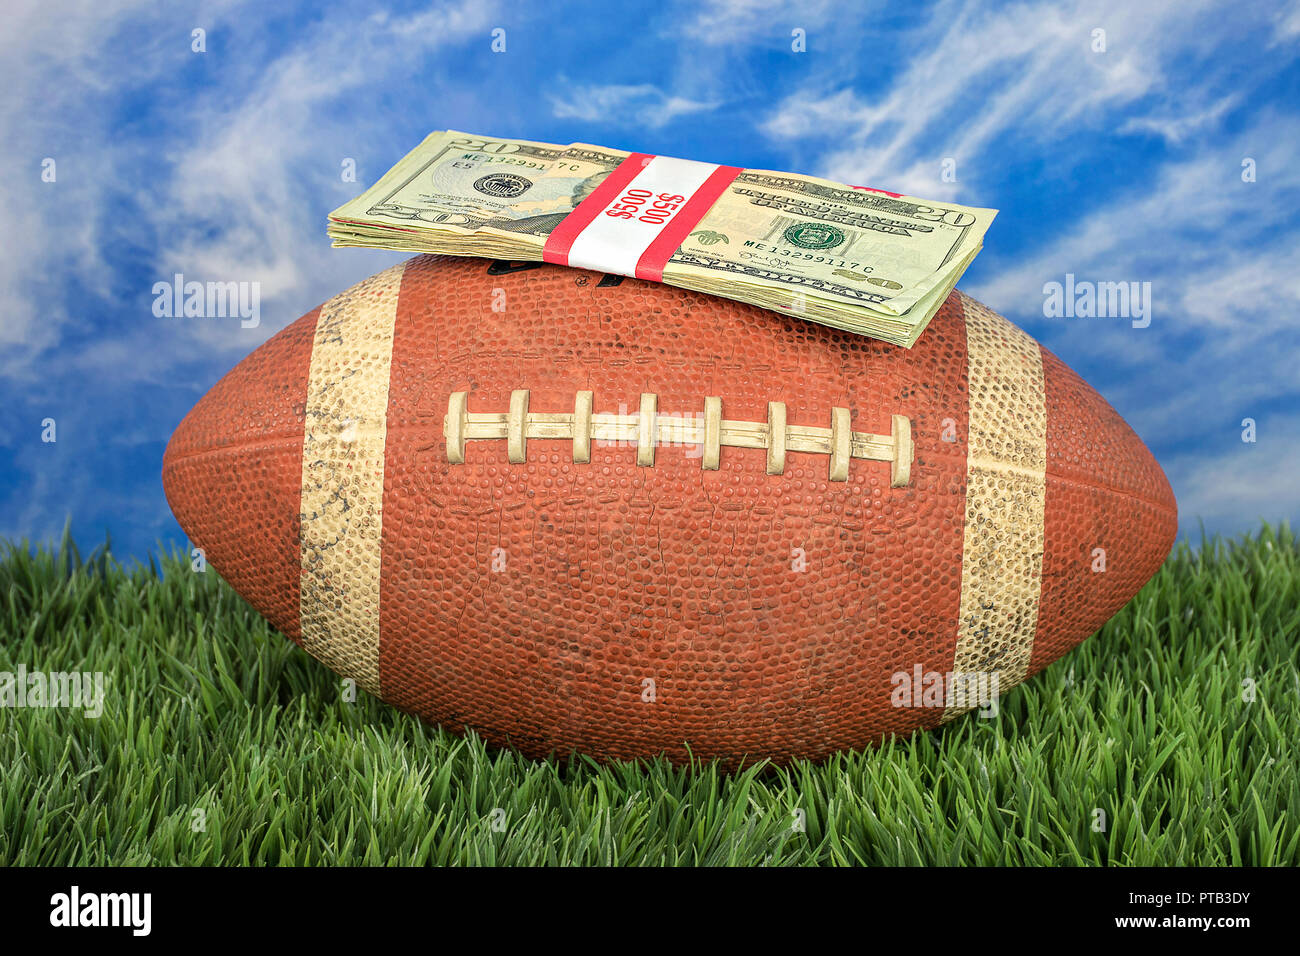 wrapped money stack on American football with sky background on grass Stock Photo